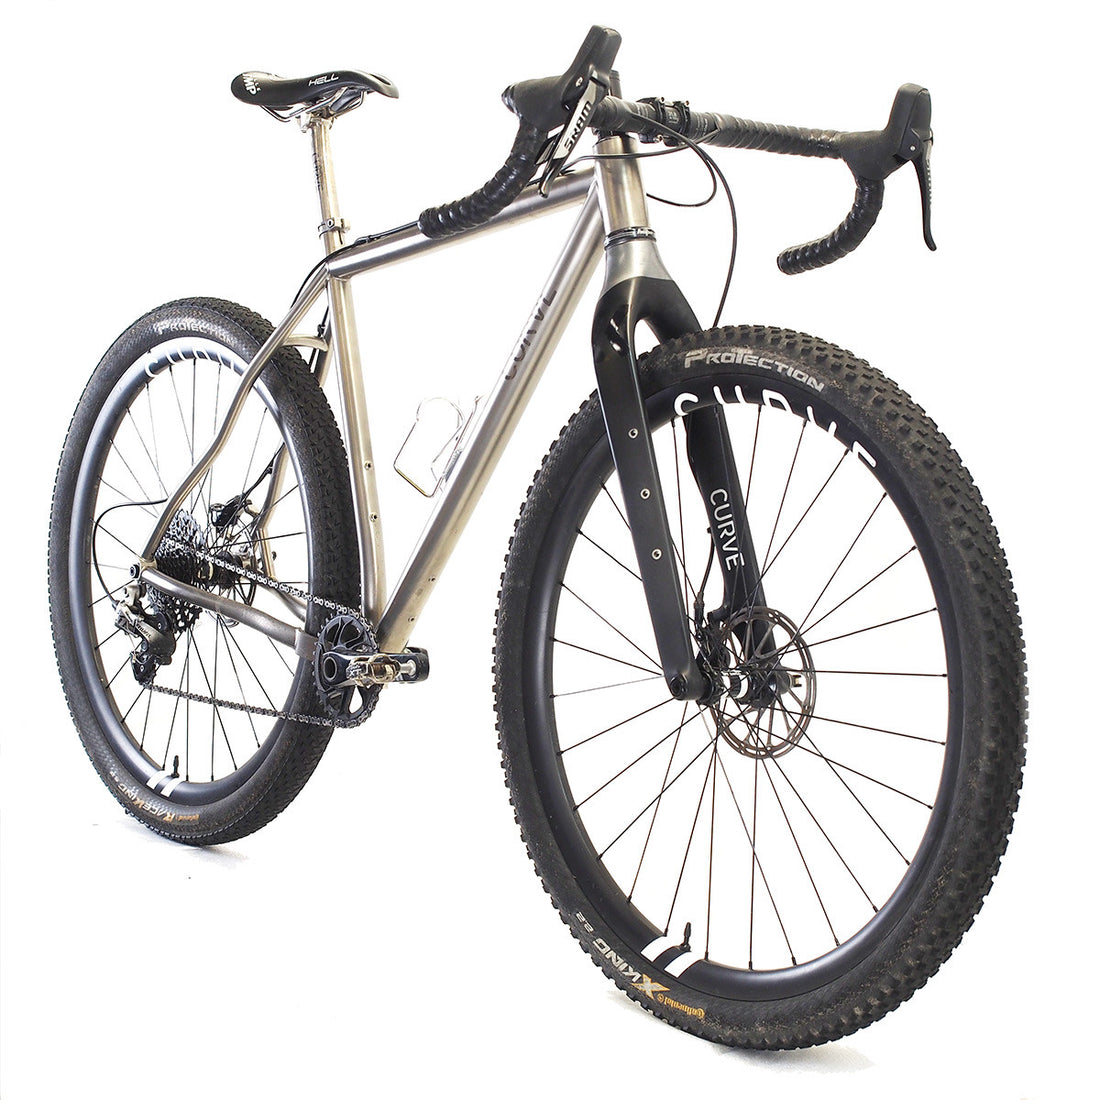 Introducing the Curve Cycling Grovel Monster - Titanium GMX